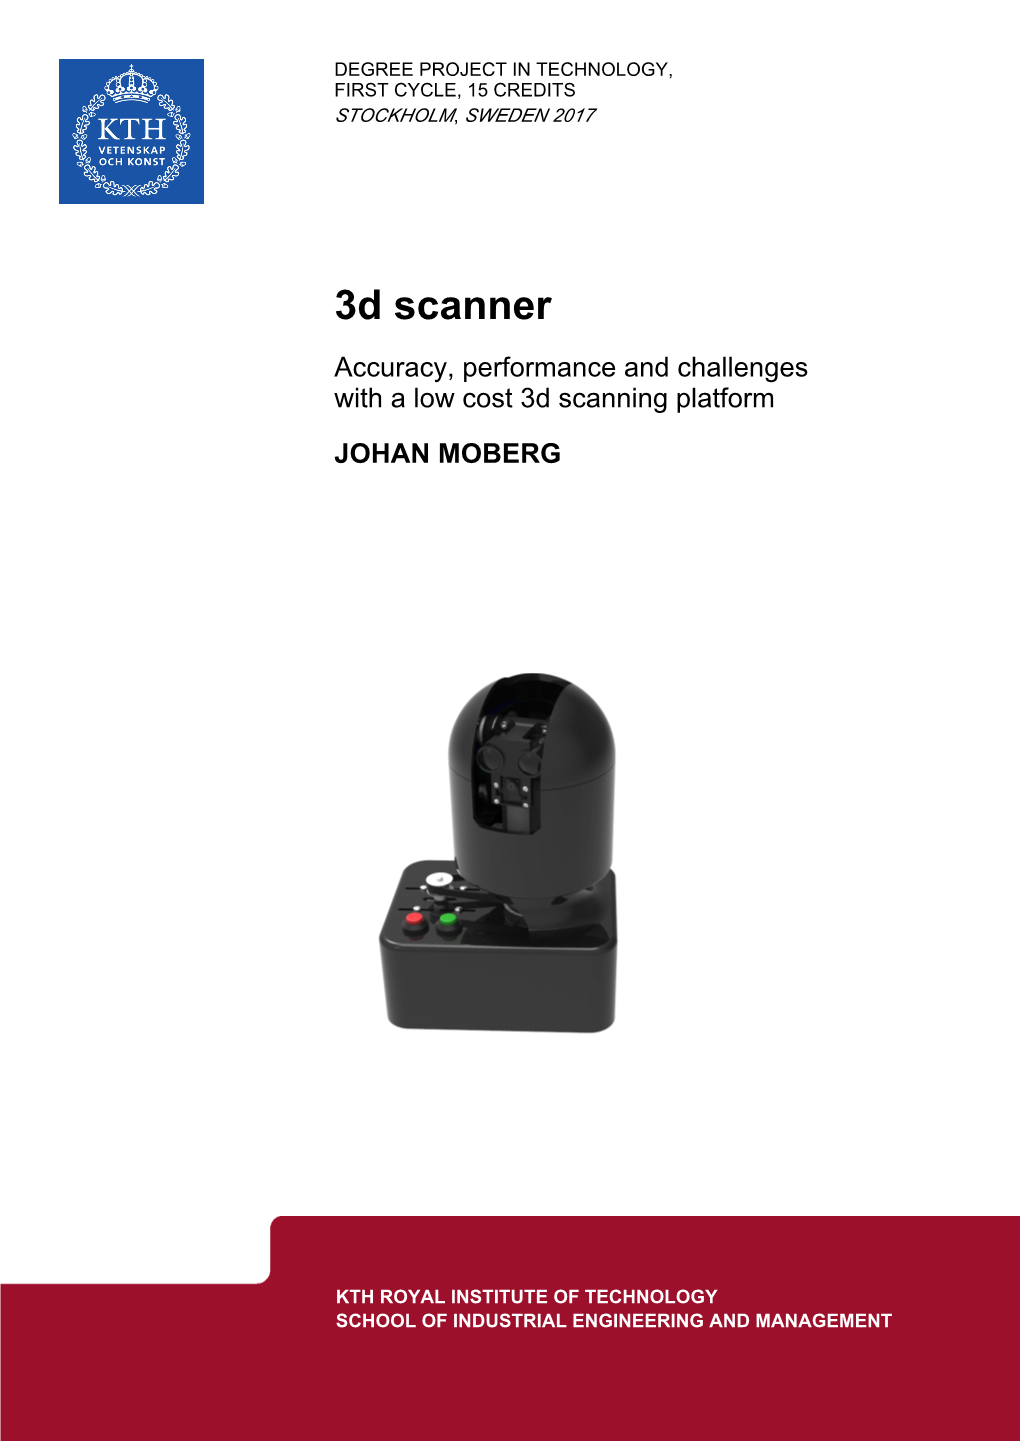 3D Scanner Accuracy, Performance and Challenges with a Low Cost 3D Scanning Platform